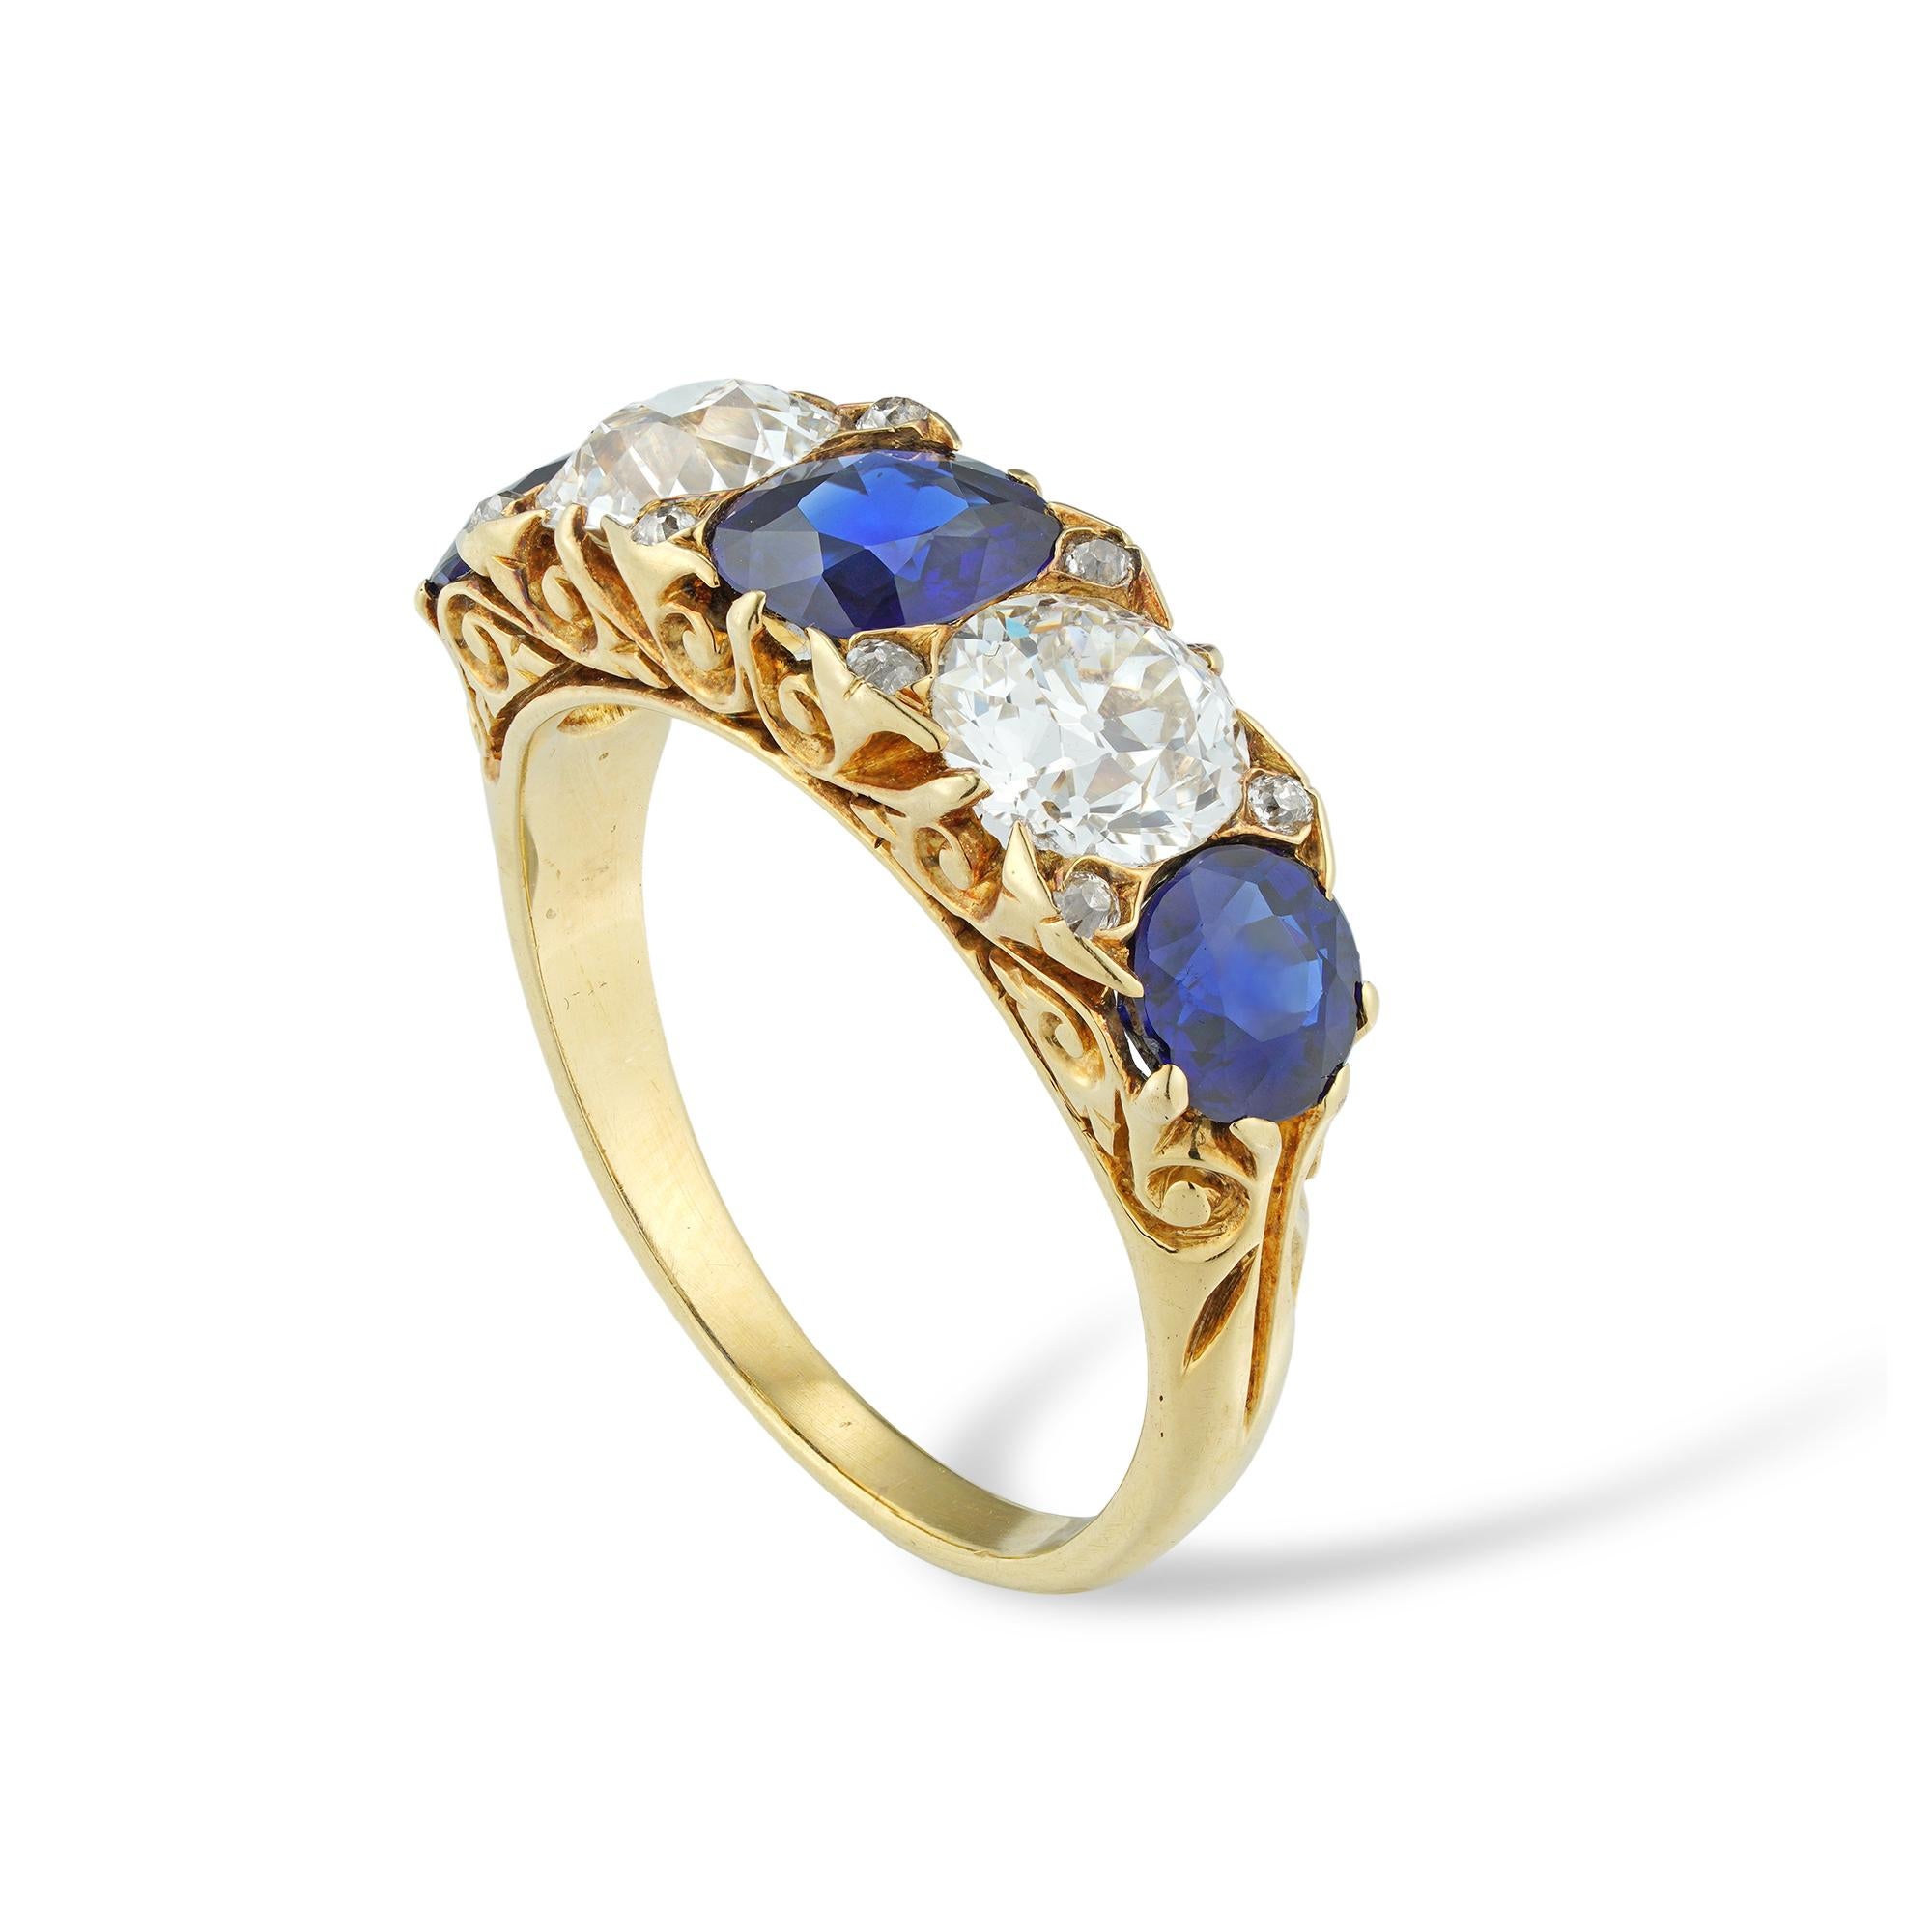 A late Victorian sapphire and diamond five-stone ring, set with three cushion-shaped sapphires estimated to weigh 2.25 carats, alternating with two old European-cut diamonds estimated to weigh 1.7 carats in total, claw-set in yellow gold mount with